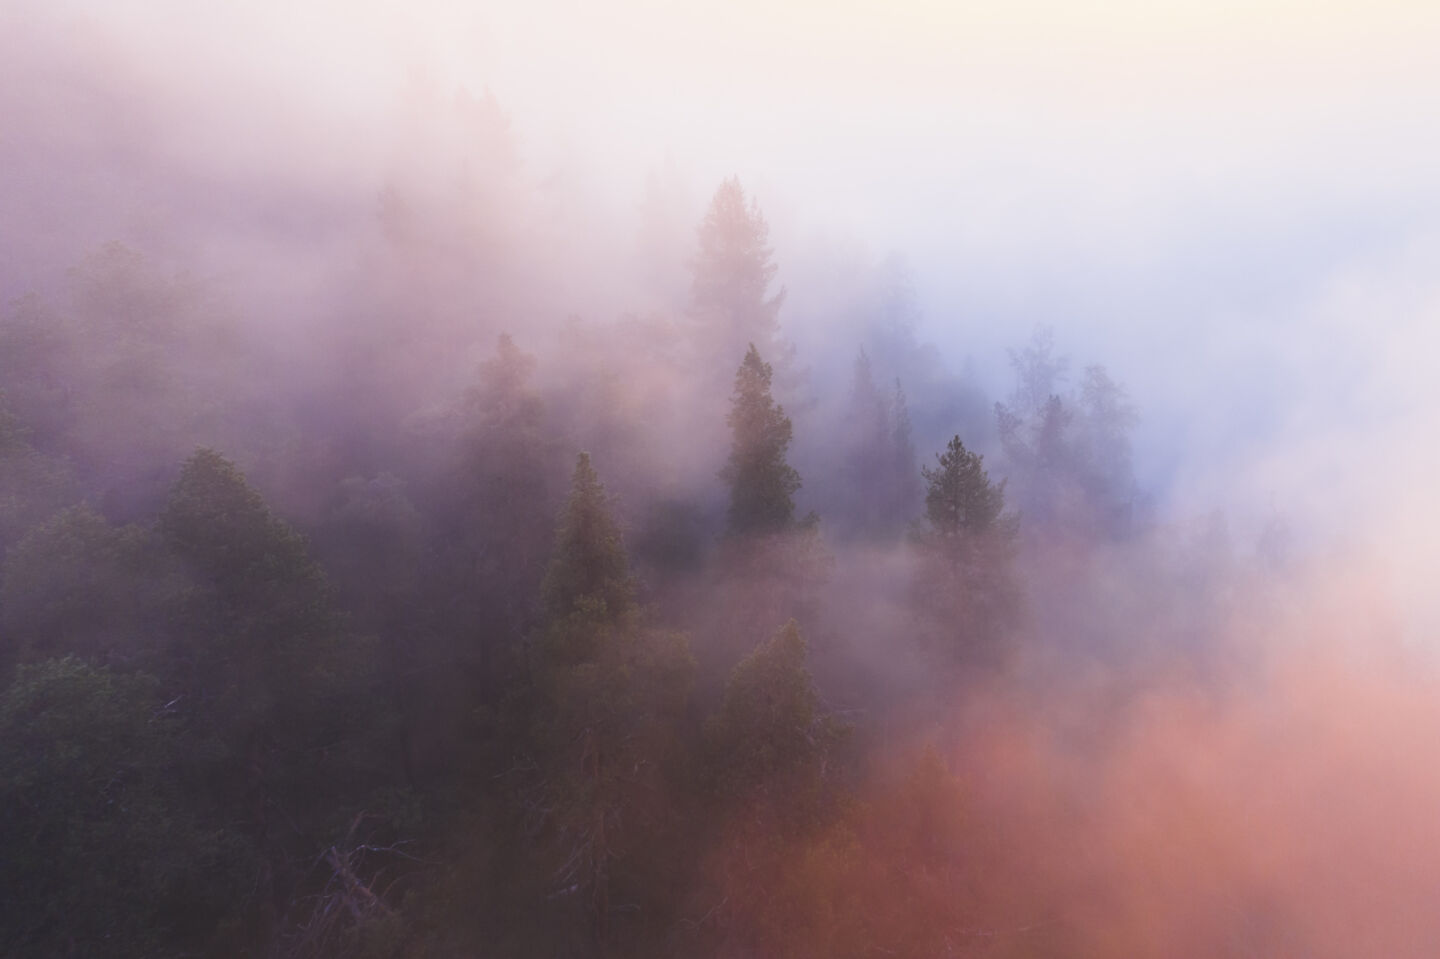 A misty autumn day in Finnish Lapland, the perfect place for your new job